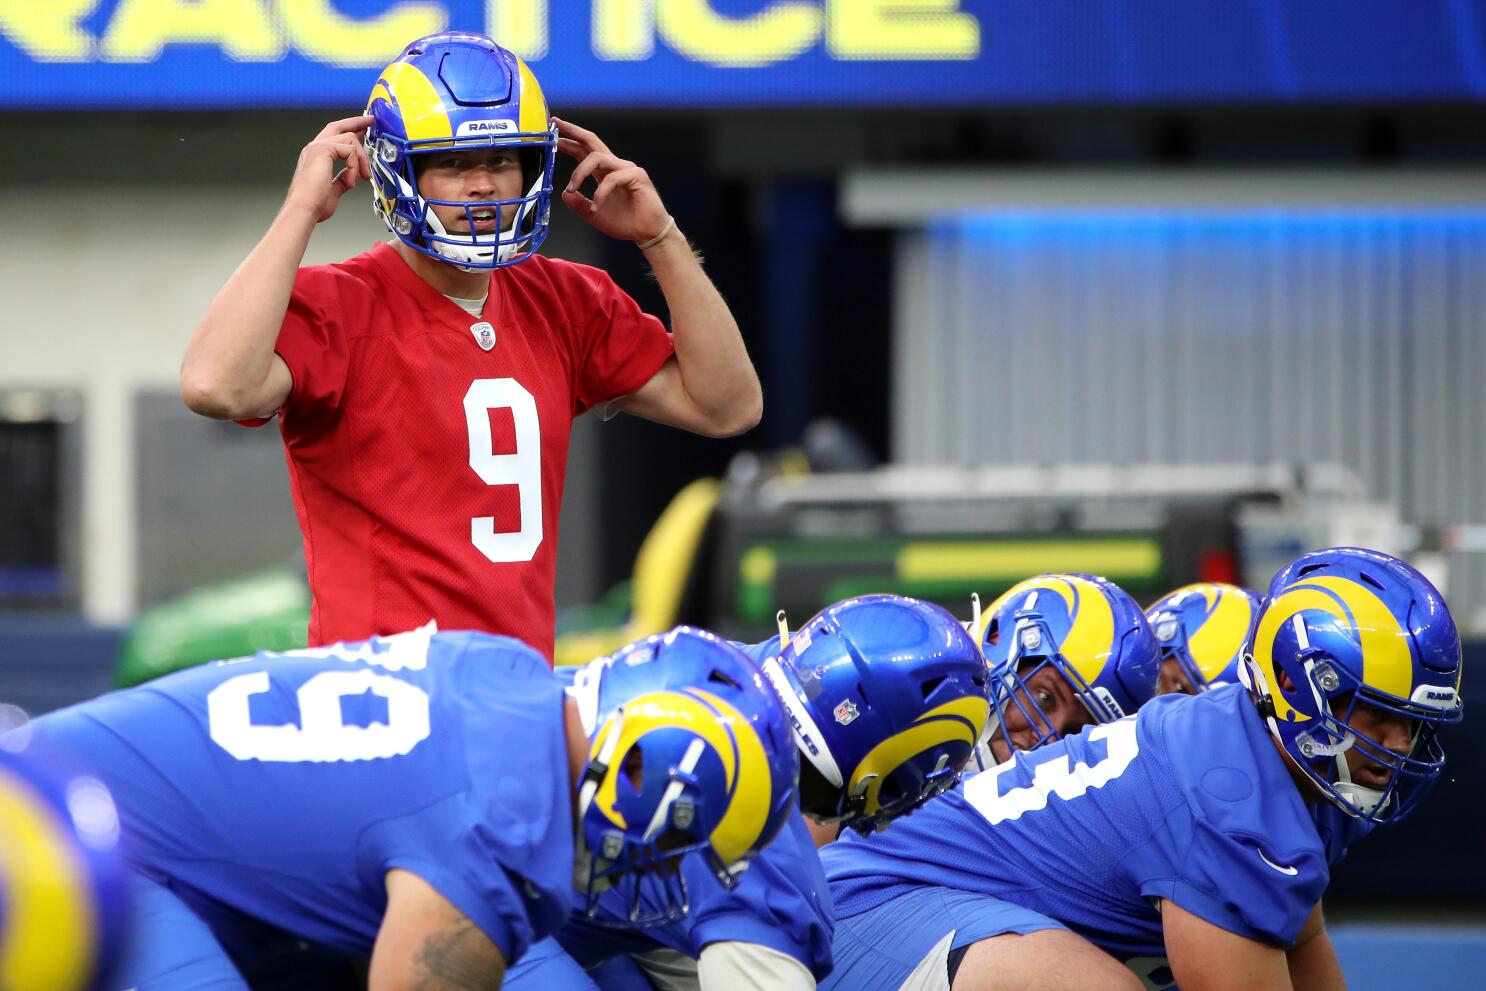 Rams QB Matthew Stafford indicates team reached out about contract